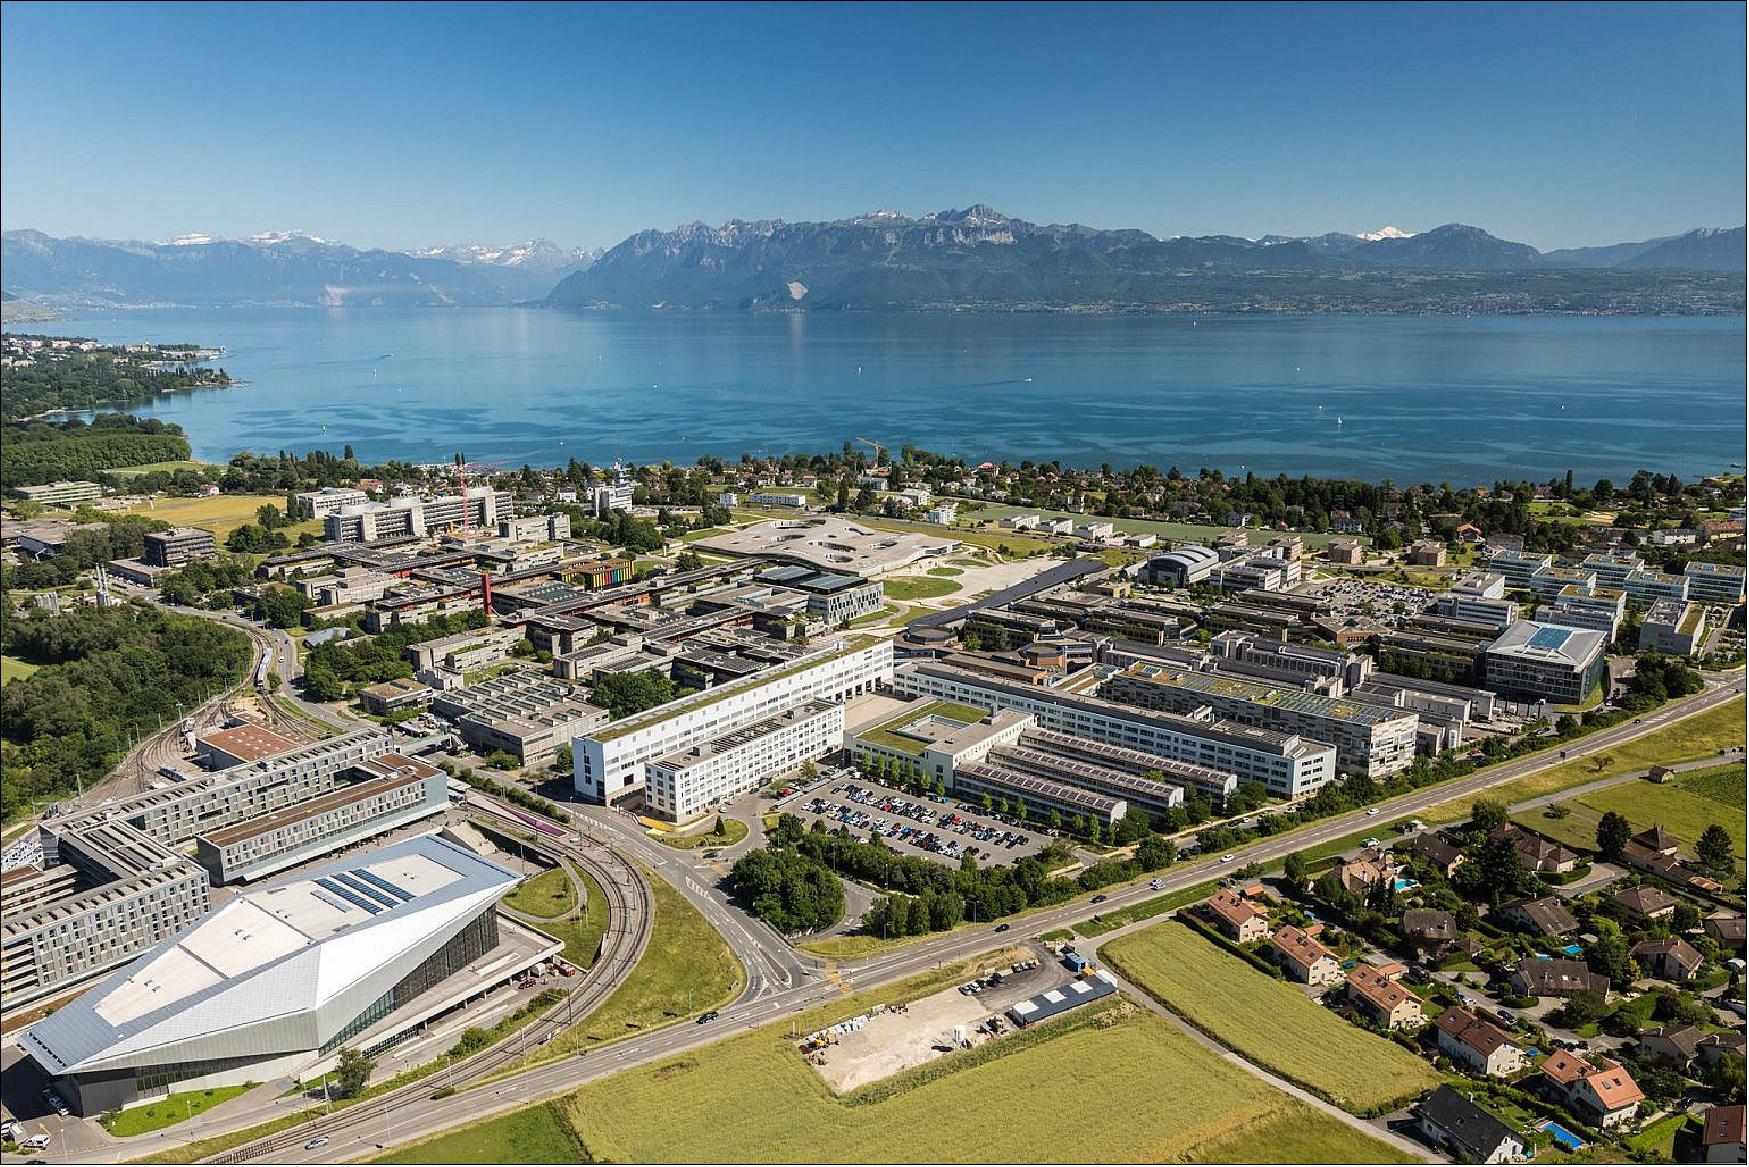 Figure 19: The main EPFL campus in Lausanne sits on the shores of Lake Geneva (photo credit: Mediacom EPFL; CC BY-SA 4.0)